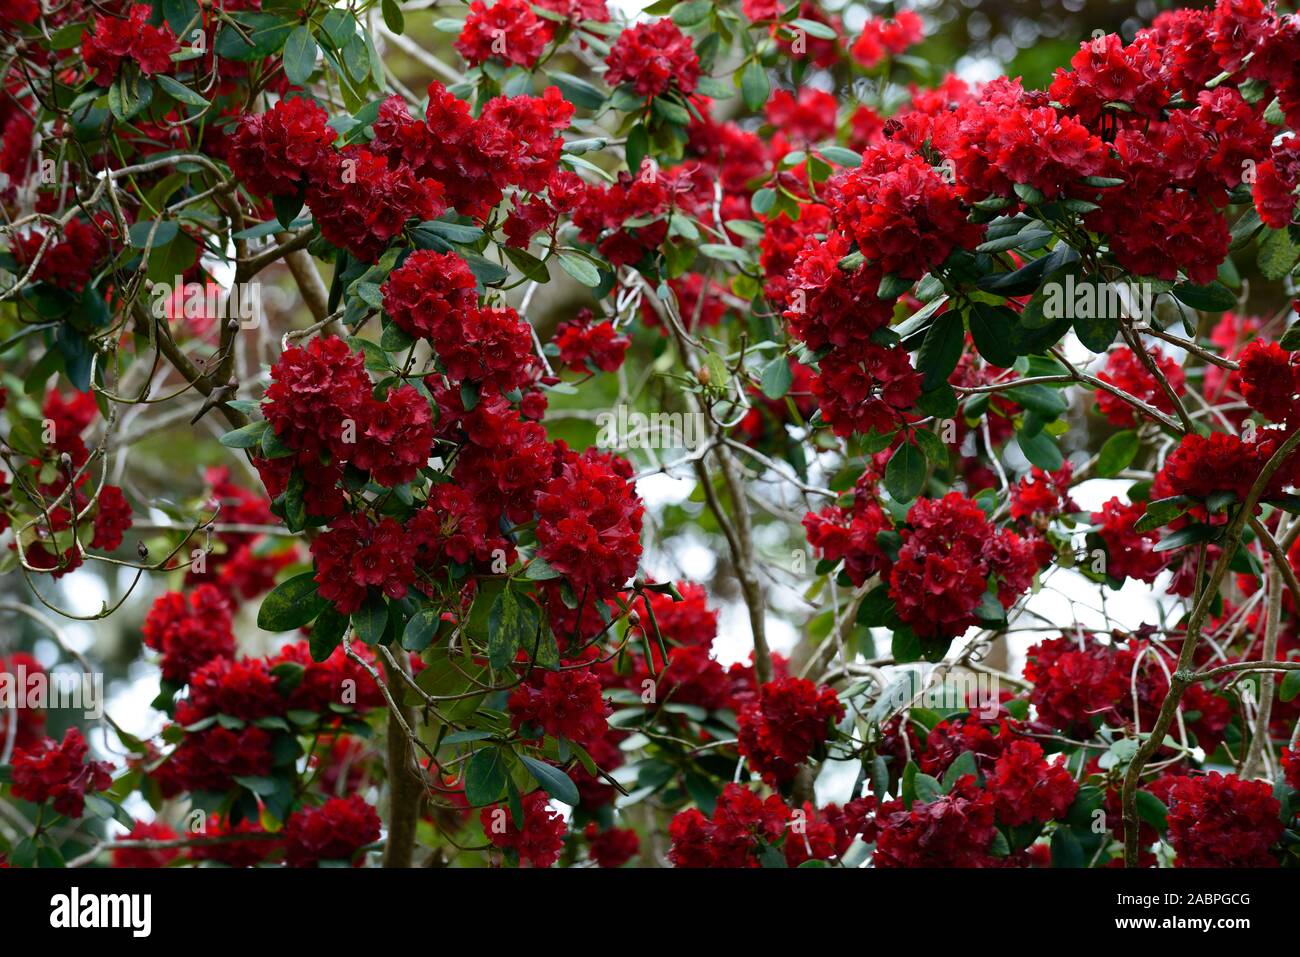 Rhododendron Queen Of Hearts,crimson red flowers,flower,flowering,tree,trees,garden,woodland,RM Floral Stock Photo